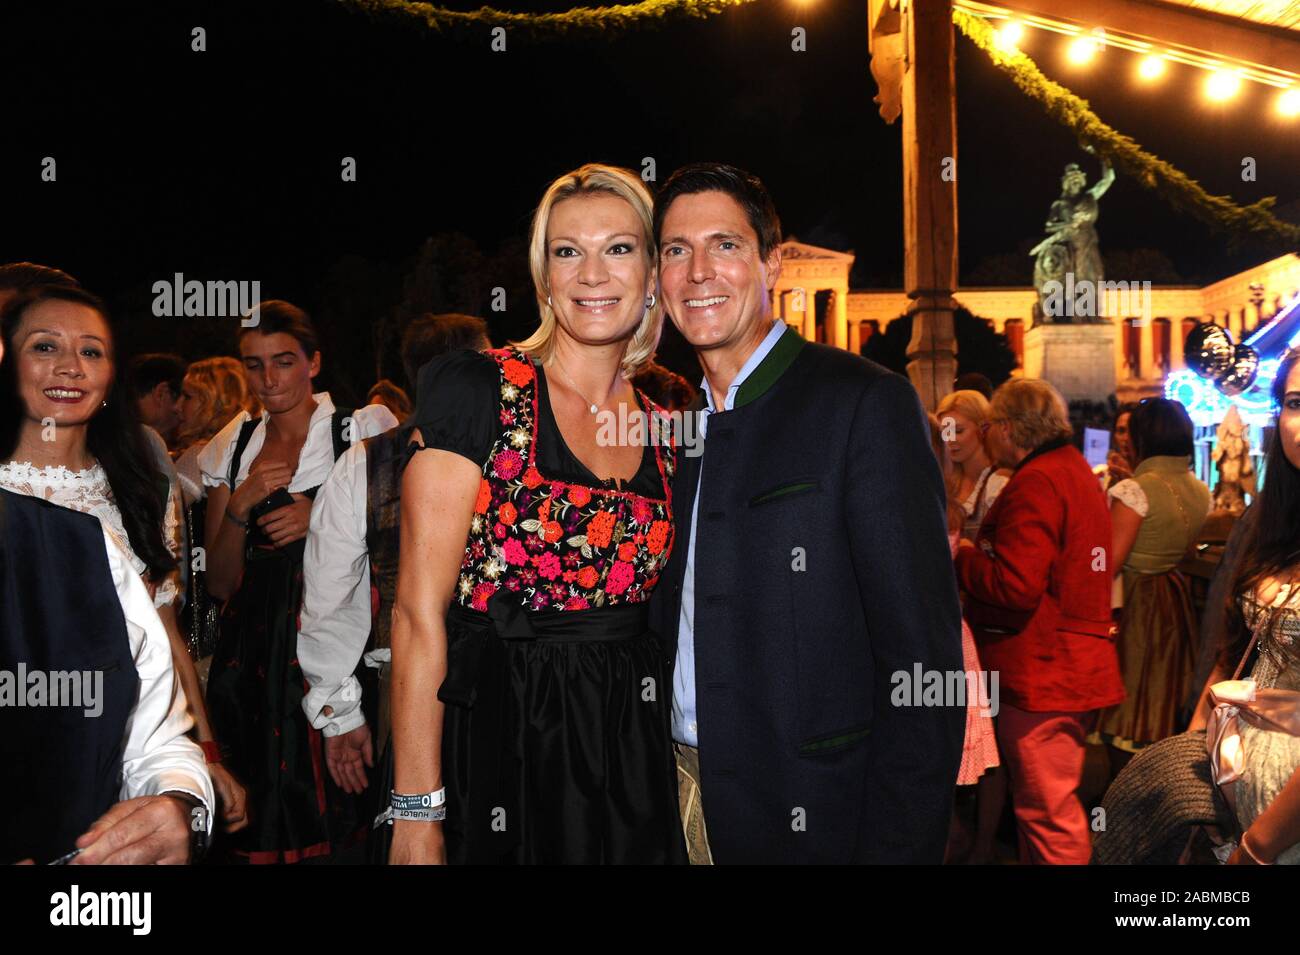 Maria Höfl-Riesch and husband Marcus Höfl at the traditional Wiesn-Almauftrieb in the Käfer marquee. [automated translation] Stock Photo